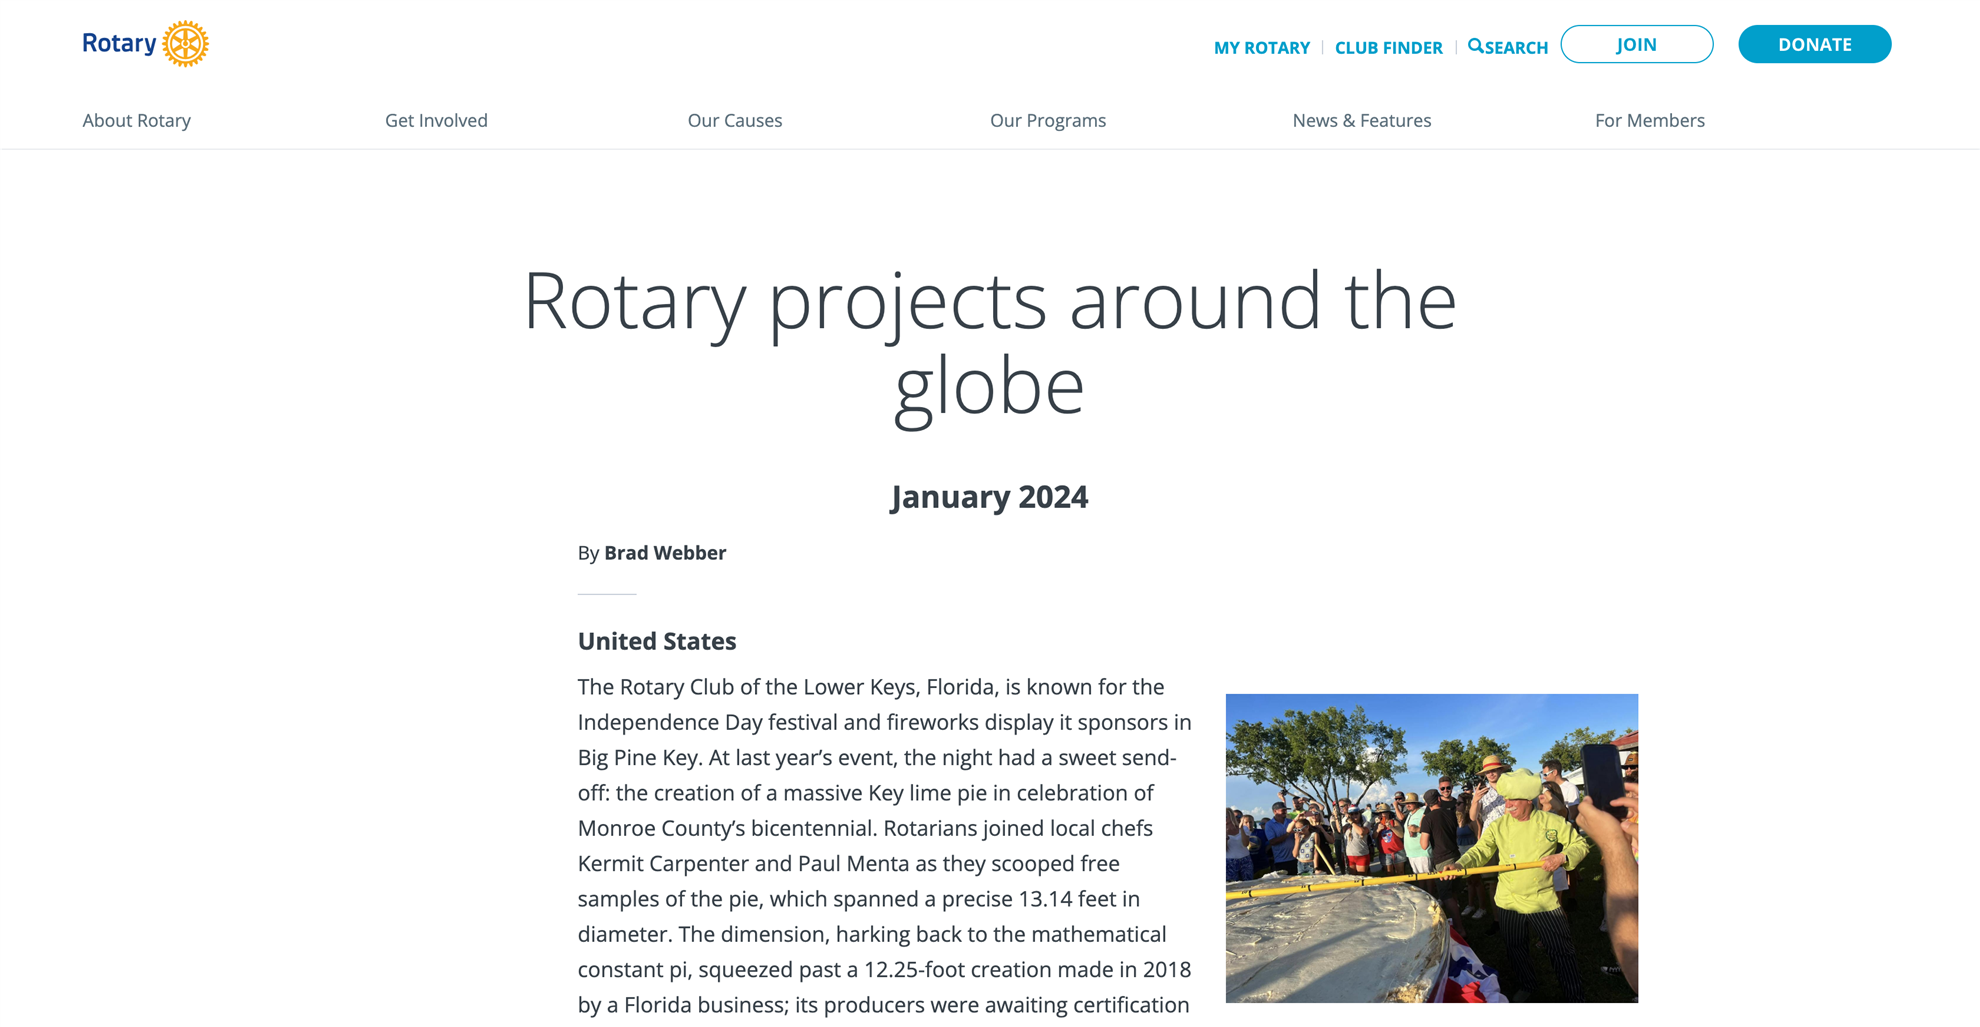 Rotary projects around the globe